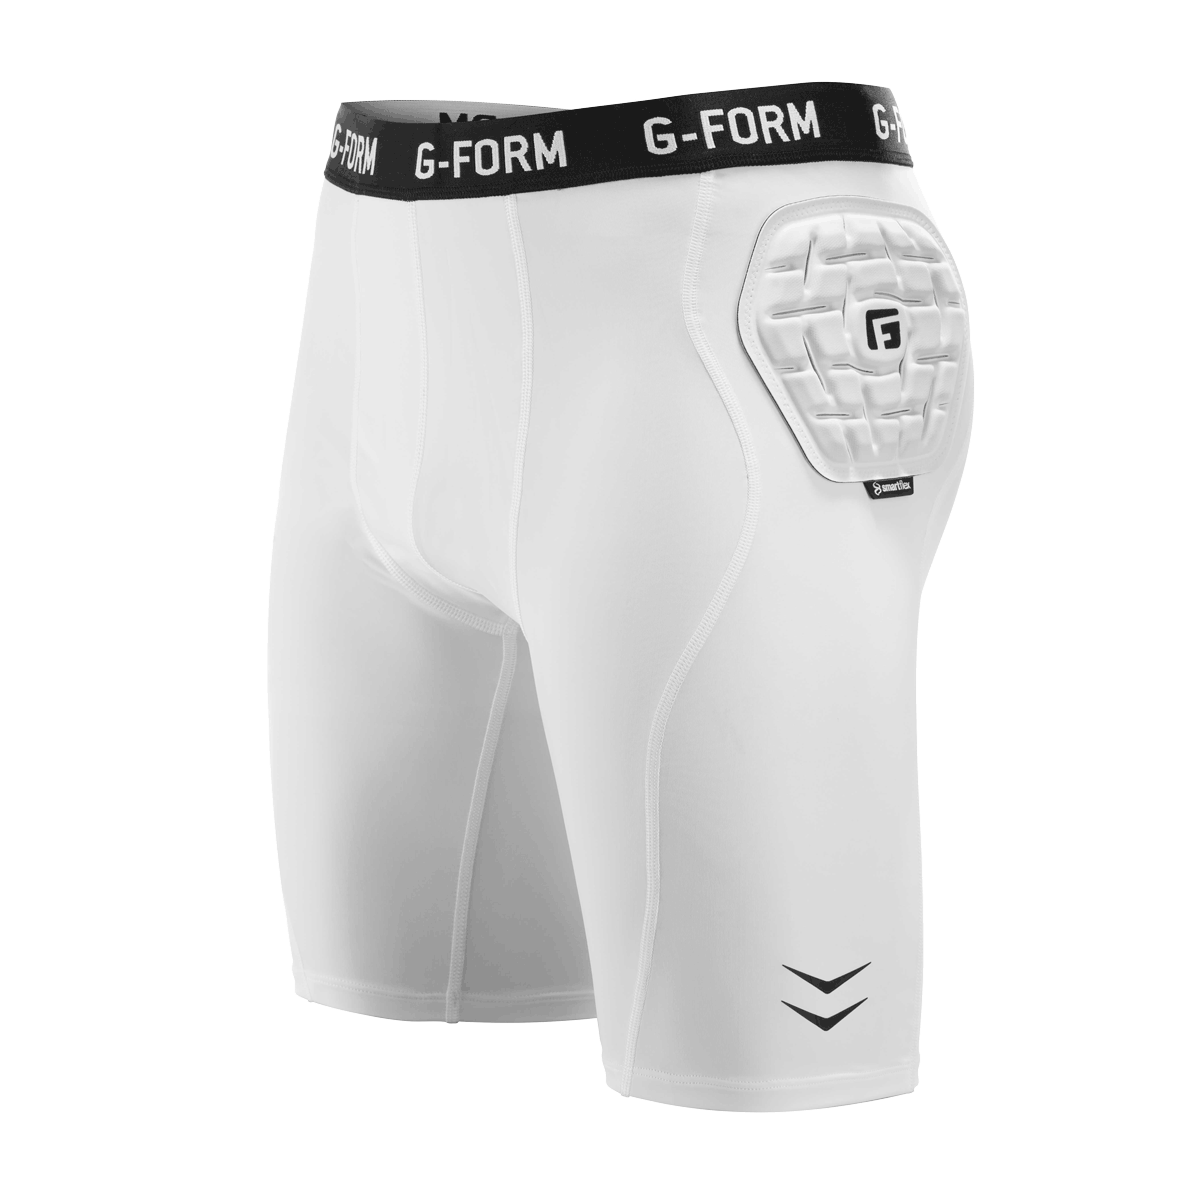 Introducing our new rework #Supreme compression short 😭 So stoked on these  🔥 Catch them Thursday 9am PST